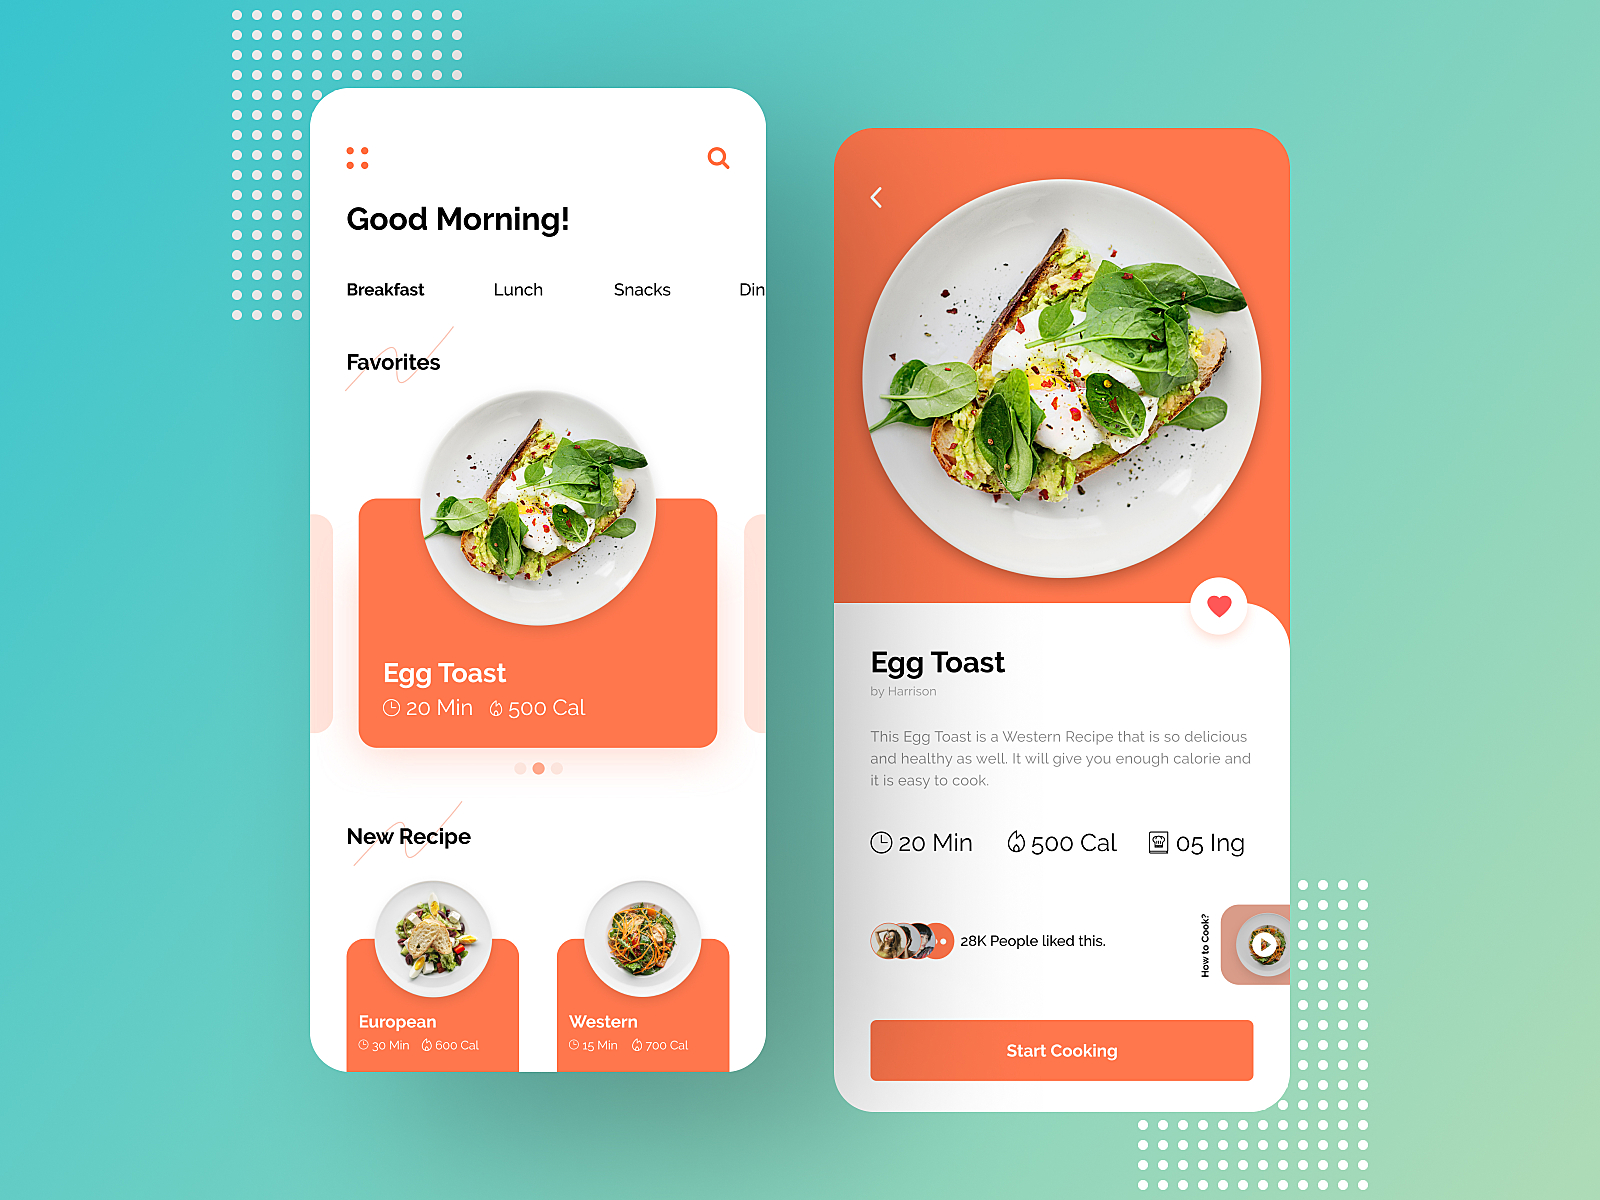 meal-planner-app-by-saikot-das-on-dribbble